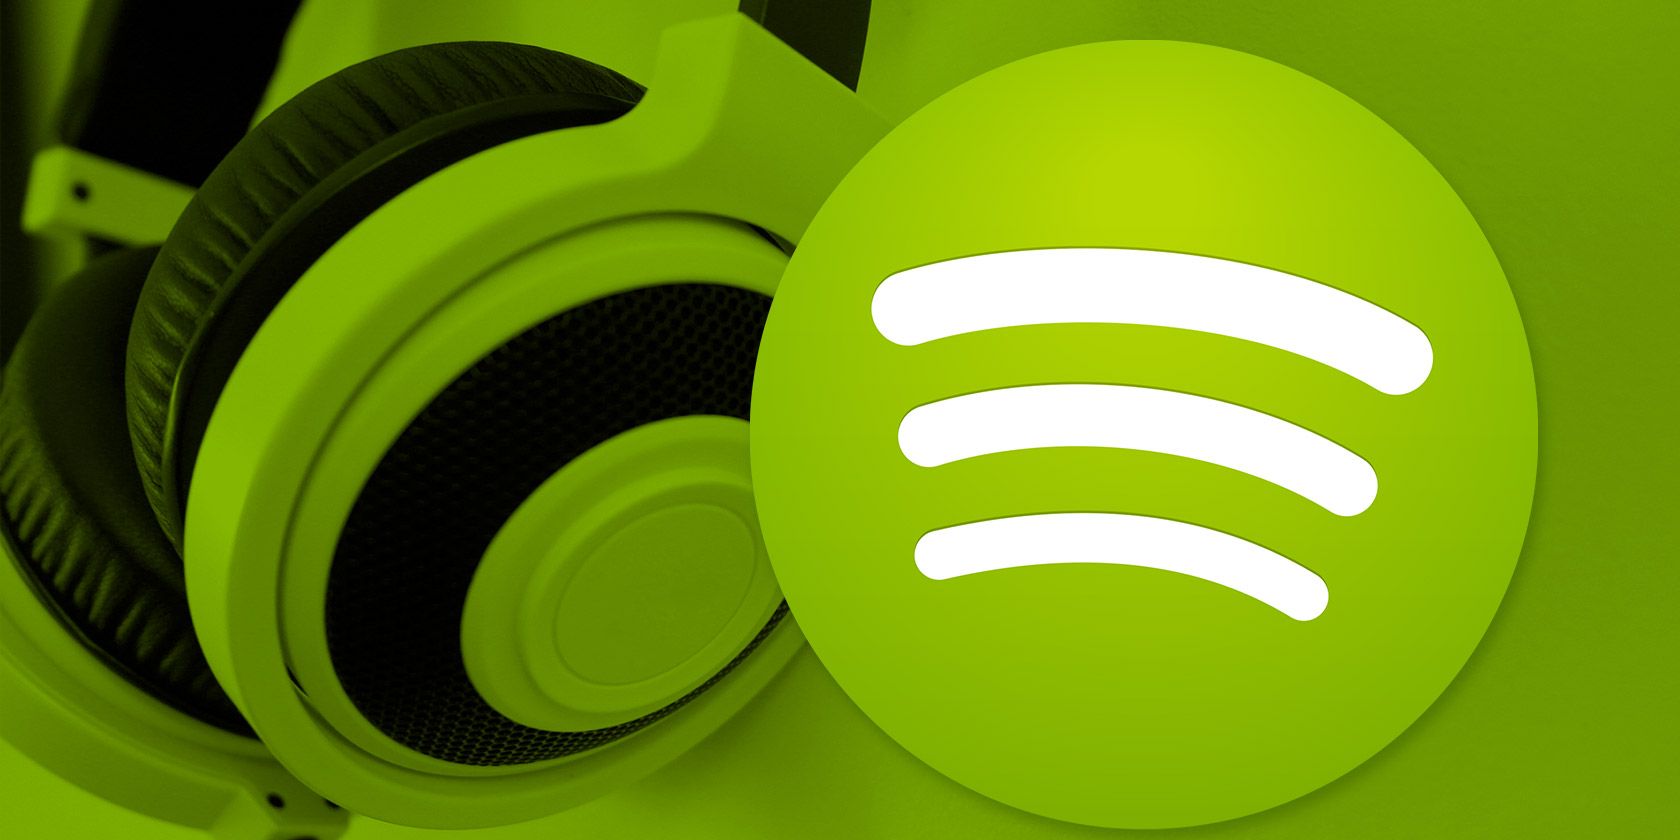 where does spotify download music on windows